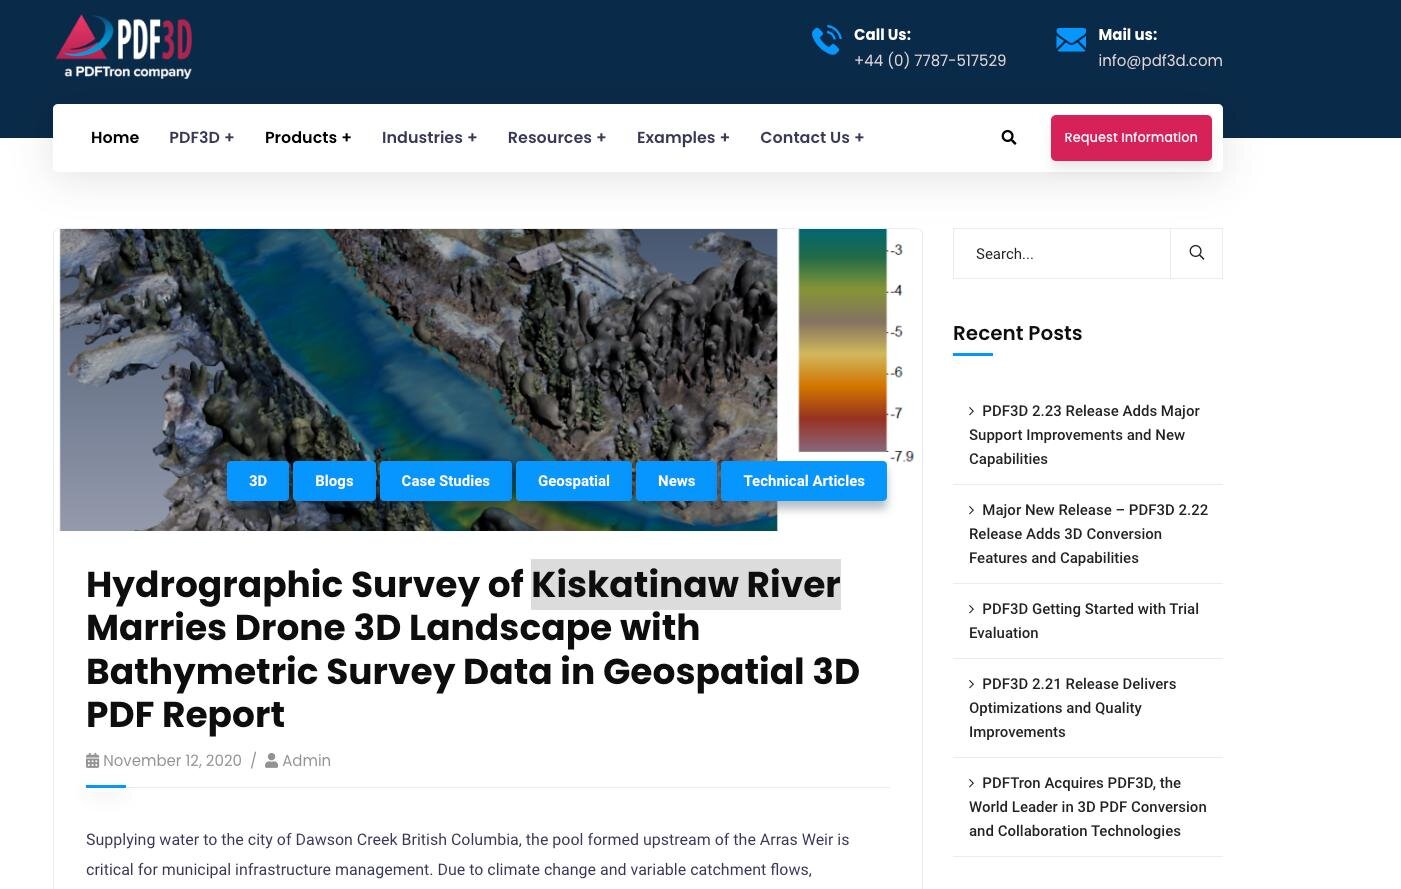 We are excited to share we were featured in a PDF3D article. This article highlights our methodology in which we combine sonar mapping with drone imagery to create 3D sludge and sediment maps. We use this technology to measure and map wastewater slud